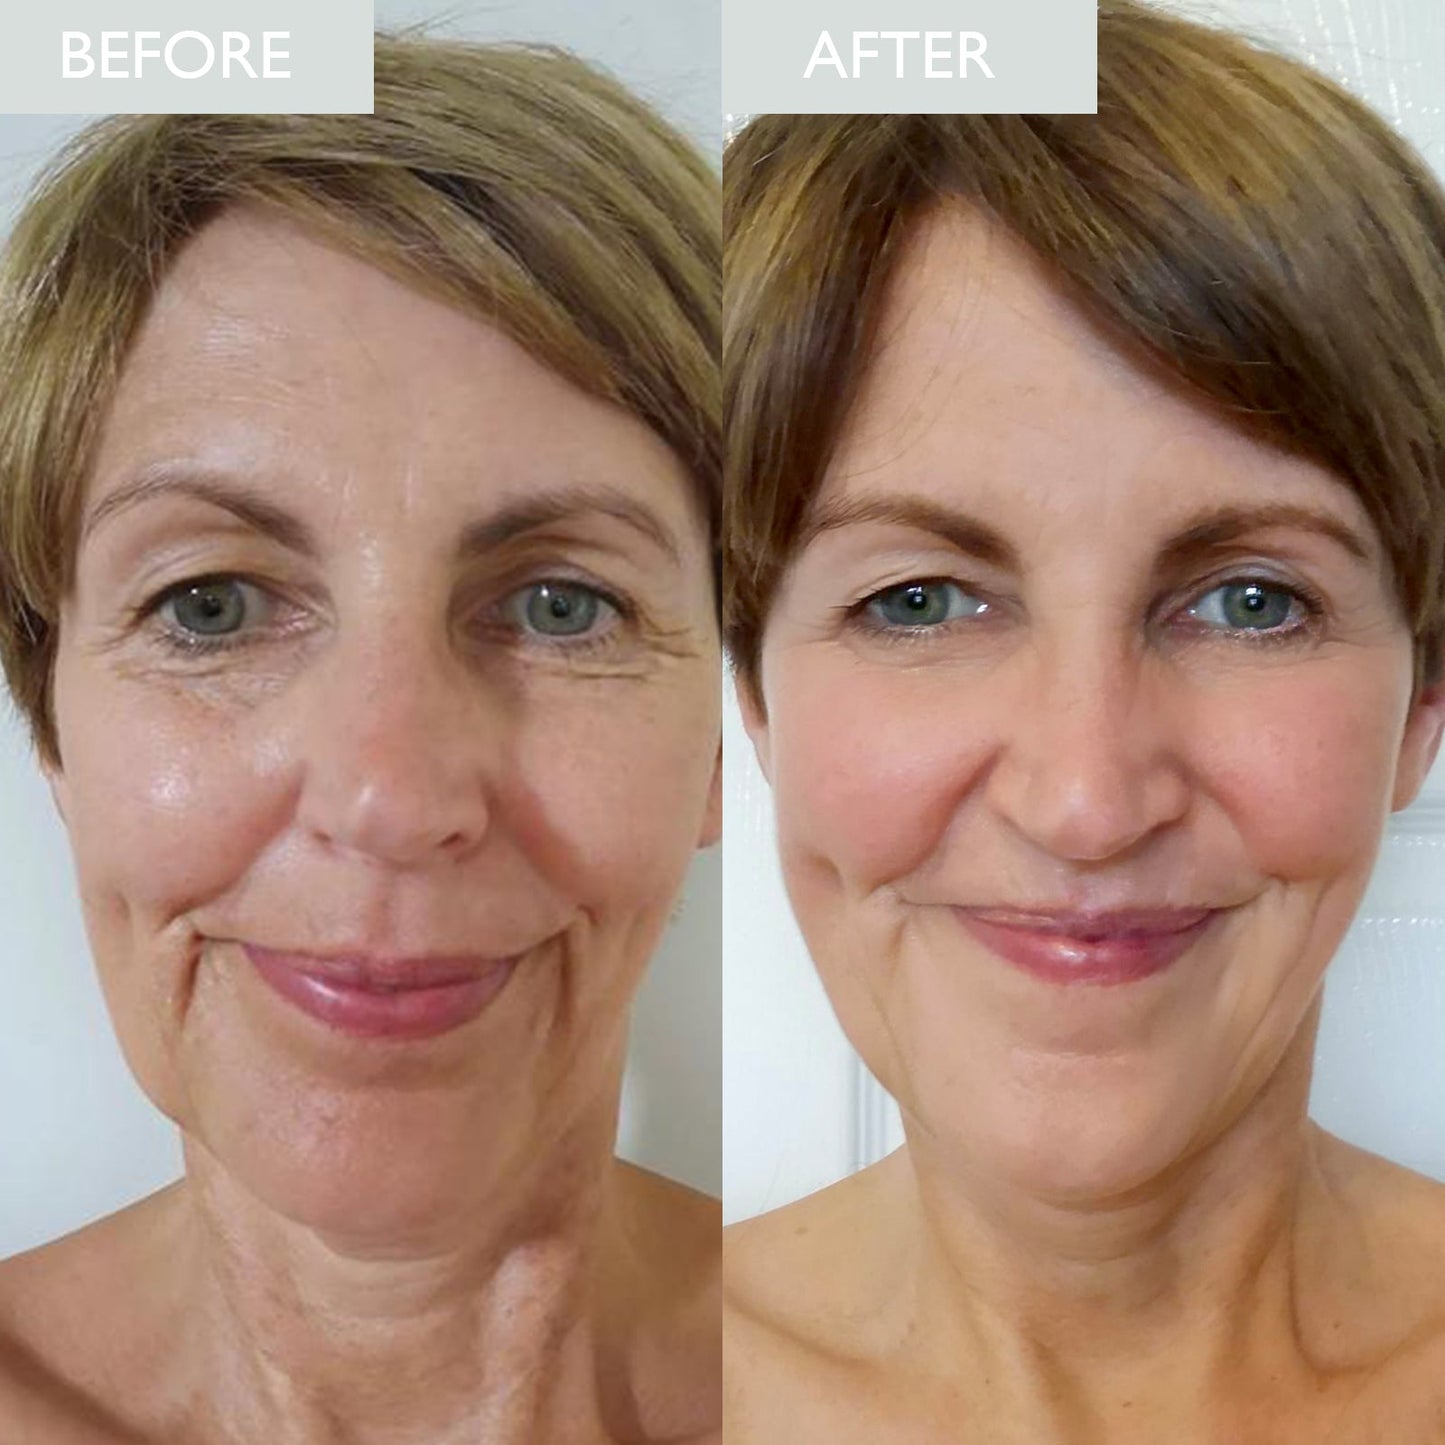 An image of a lady showing skin improvement in ageing from using Skinician products.  Displayed as a before and after image.